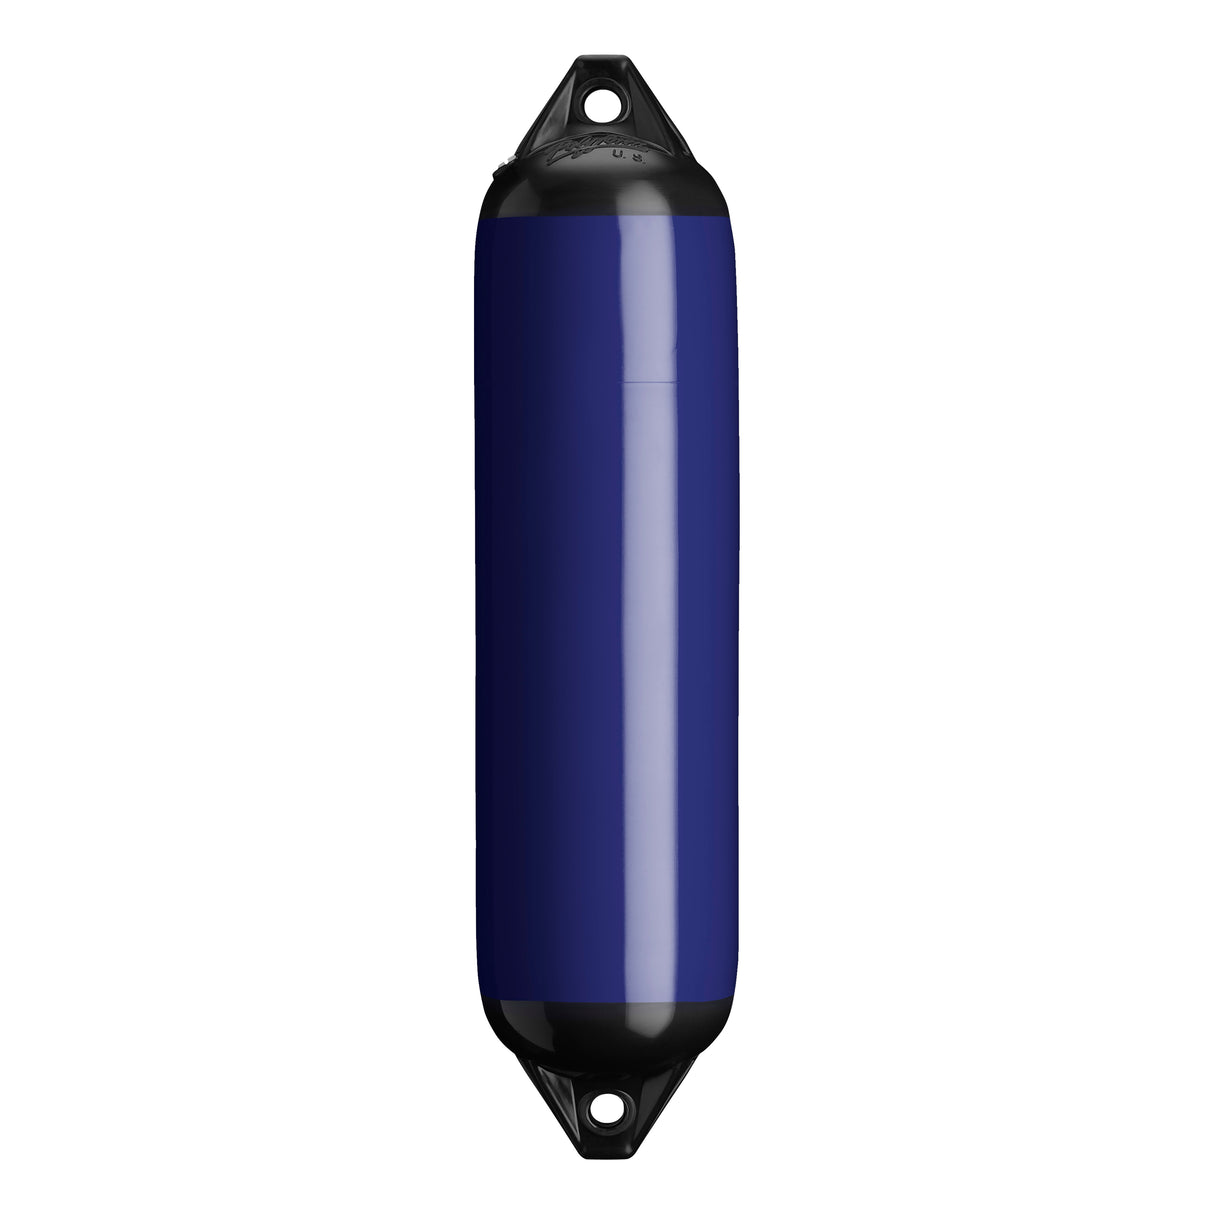 Navy Blue boat fender with Black-Top, Polyform F-1